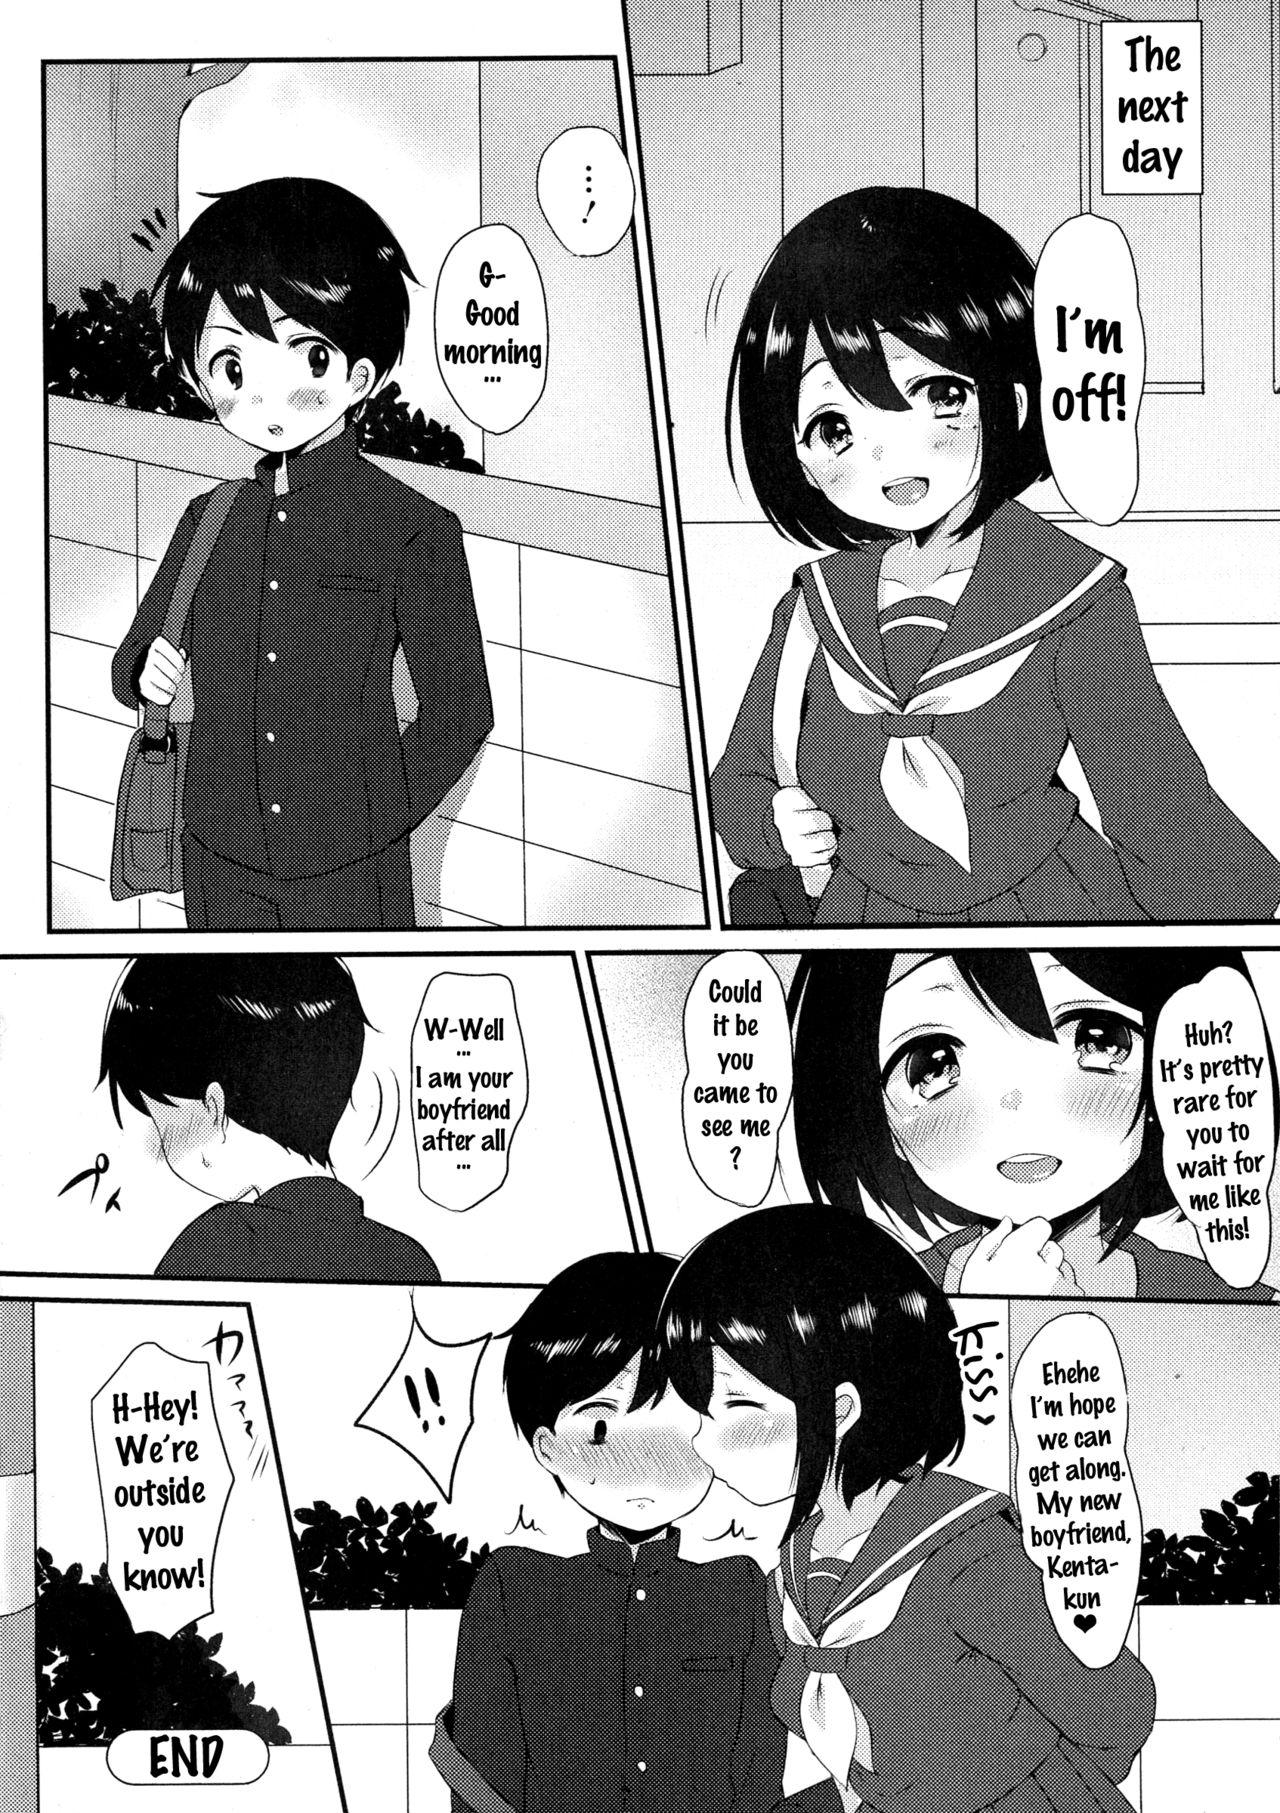 [Paragasu] Onee-san to Issho | Together with Onee-chan (COMIC JSCK Vol. 6) [English] {doujins.com} 15